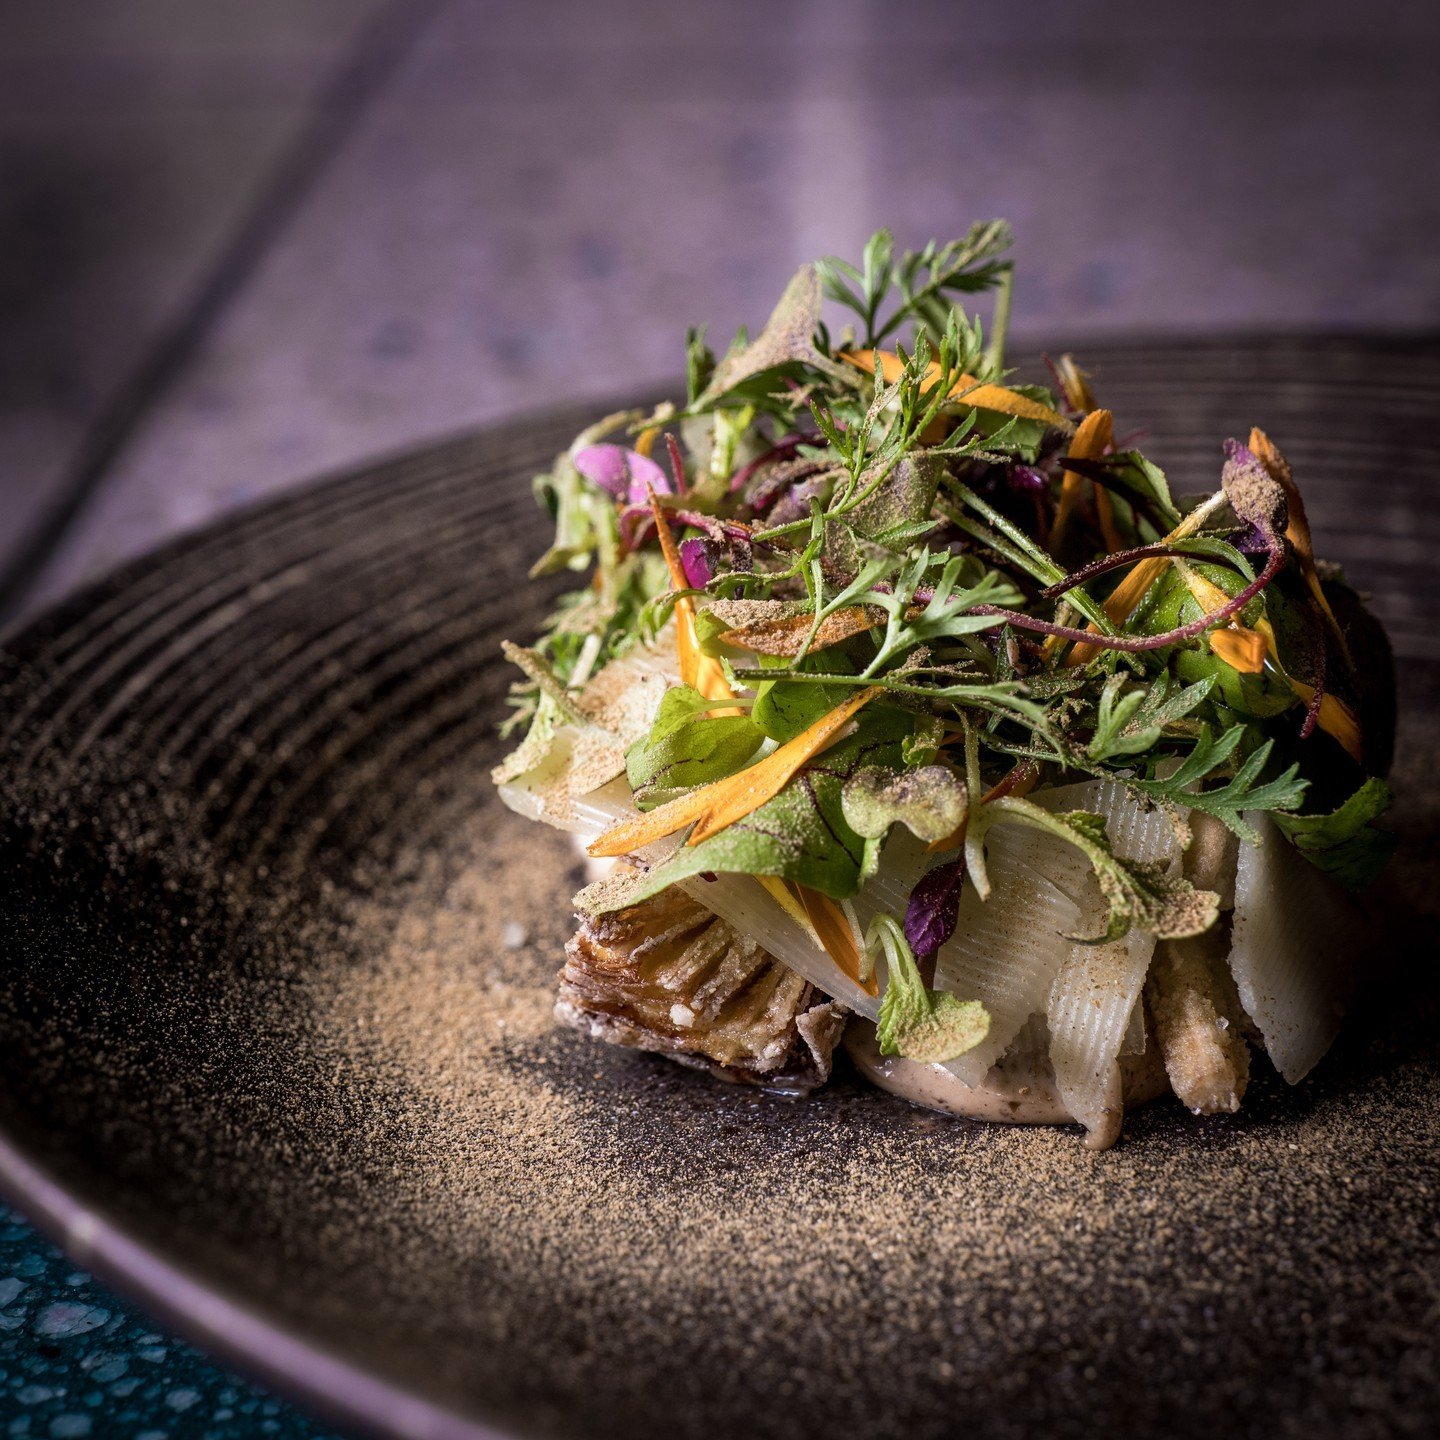 LAST OF THE SEASON ARTICHOKE

Truffle emulsion, 12 month Kleinriver Gruberg, wild herbs, porcini dust.

Book your table online (link in bio), email reception@thechefstable.co.za or phone 031 001 0200. 

@eatoutguide 
@jhp_gourmet_guide 
@sebastian.ni